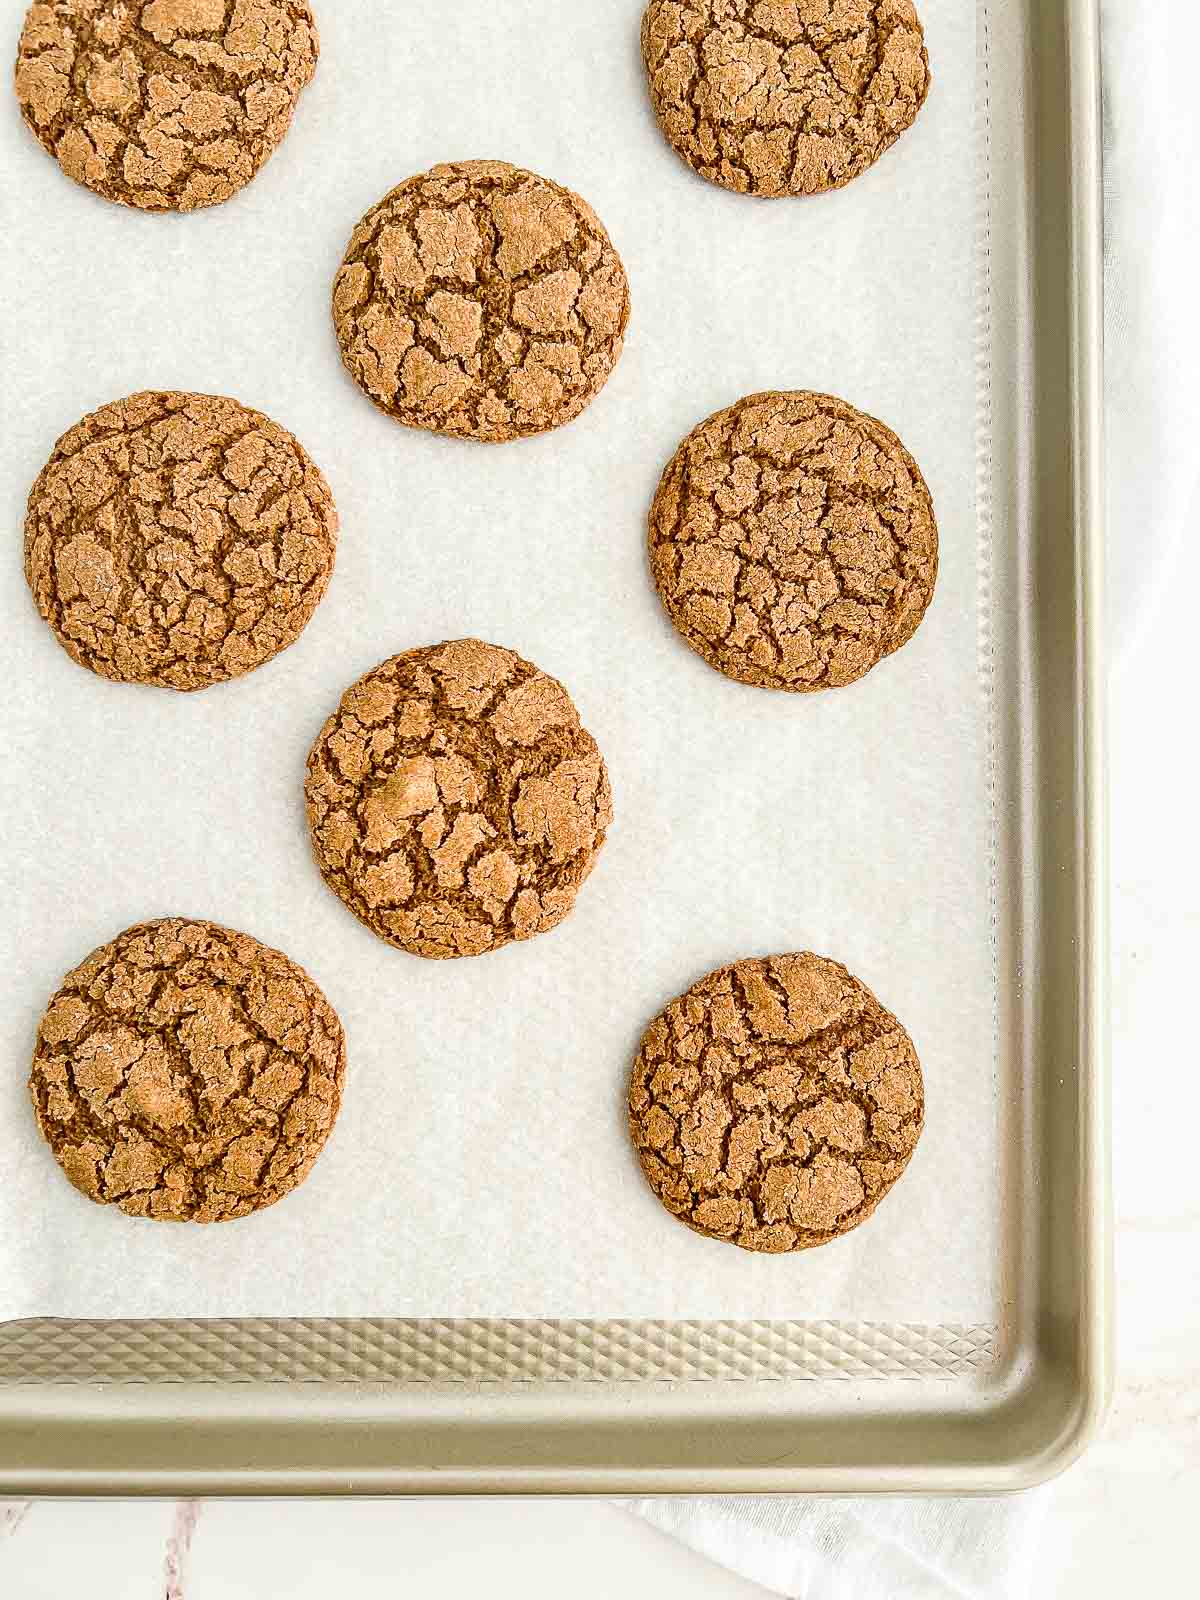 Baked vegan gingersnaps on a cookie tray.